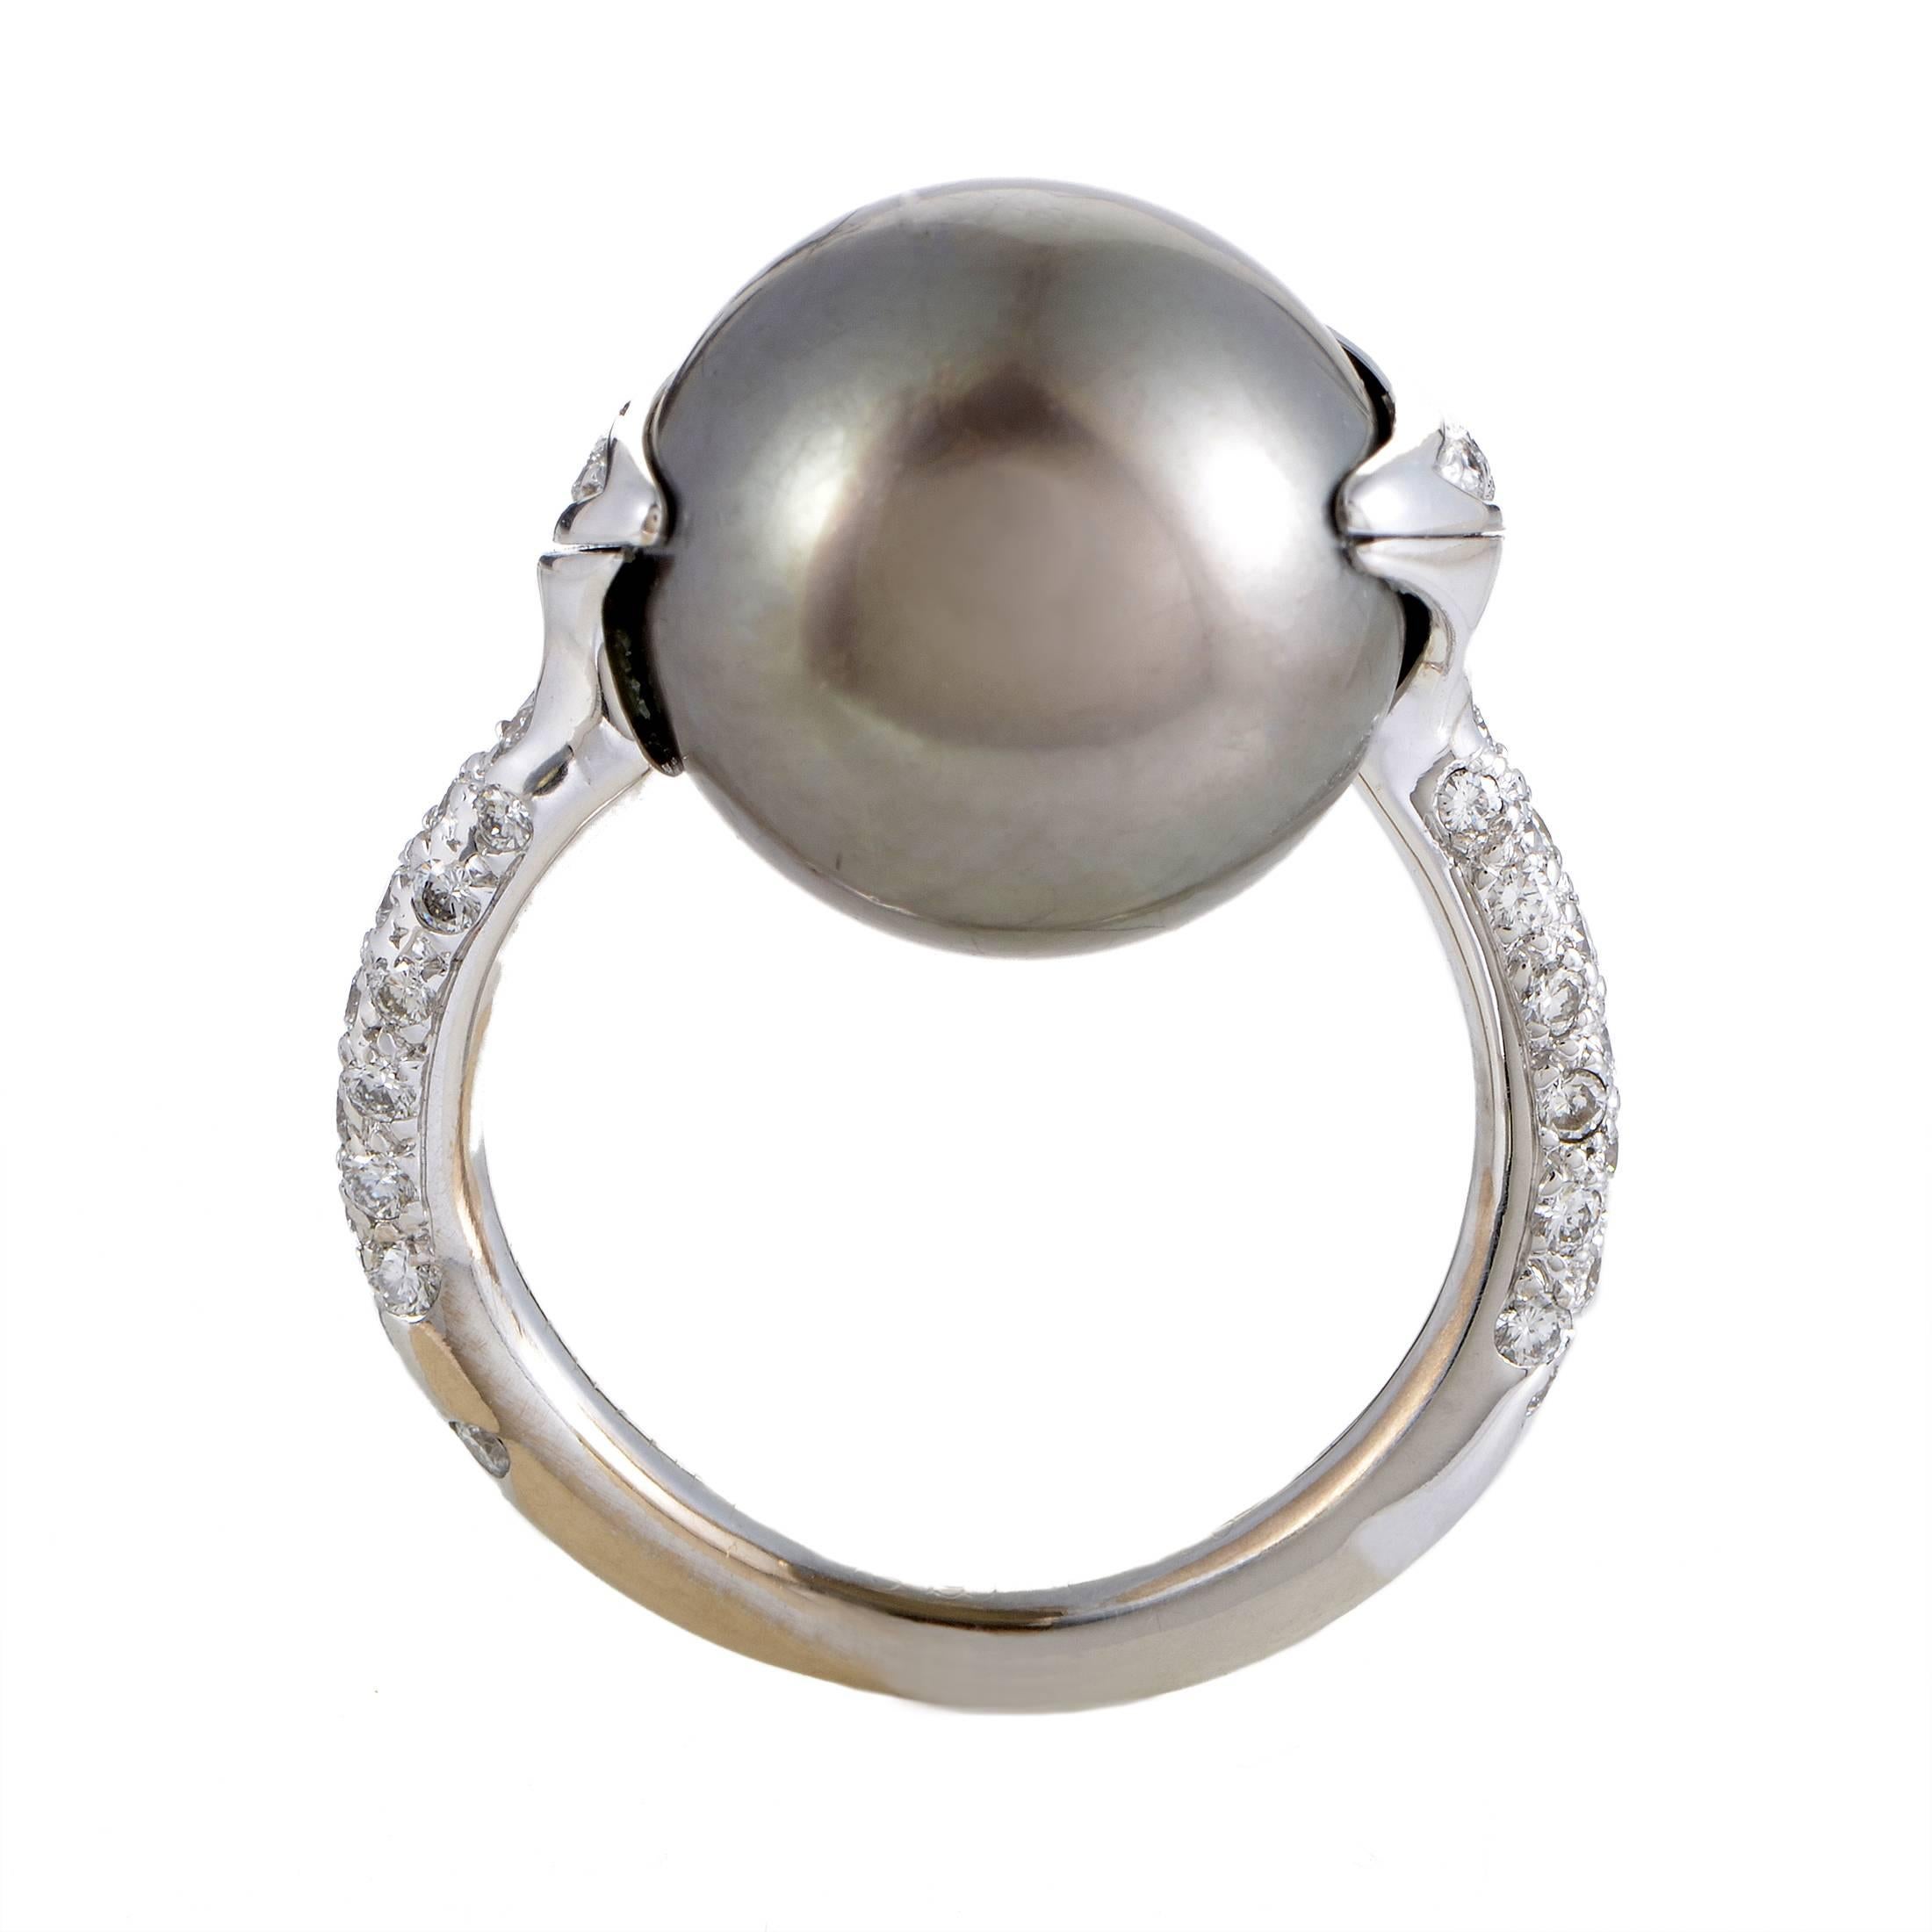 The stunning darkness and immaculately gleaming surface of the gorgeous 13.70mm Tahitian pearl brilliantly contrast the bright sparkling diamonds weighing in total 0.75ct to create a fascinating sight in this exceptional 18K white gold ring from